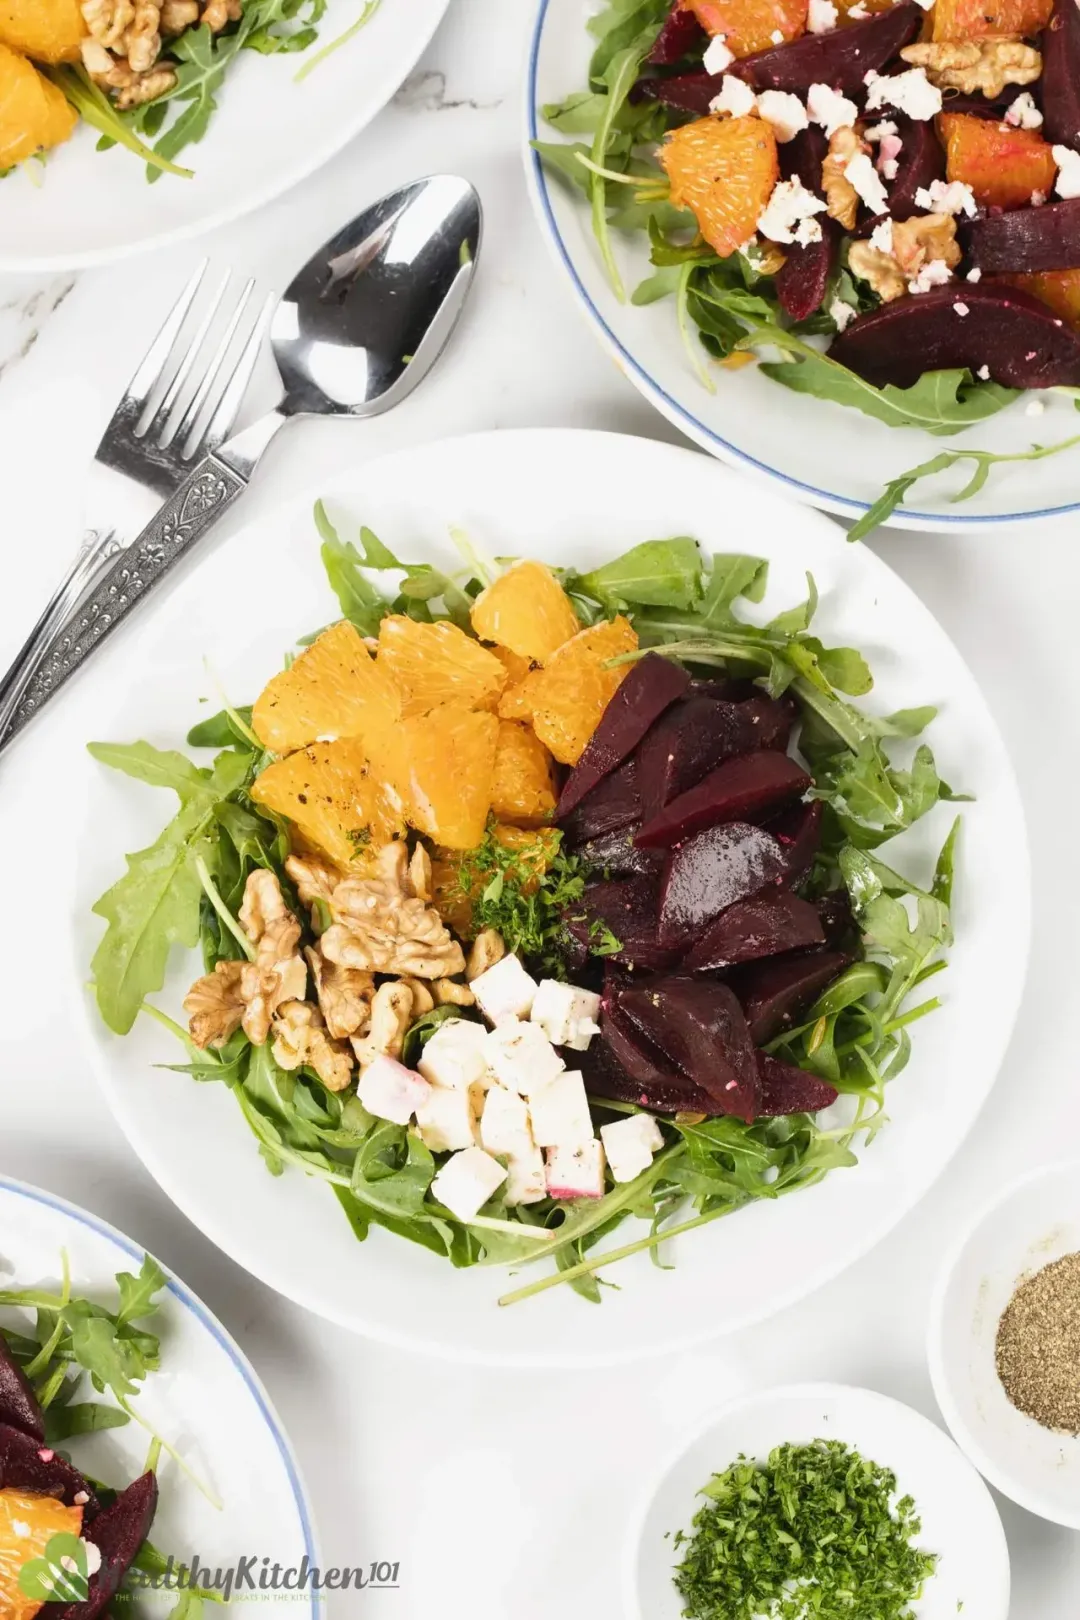 A salad with beets, feta cheese, and greens on white plates with silver cutleries.